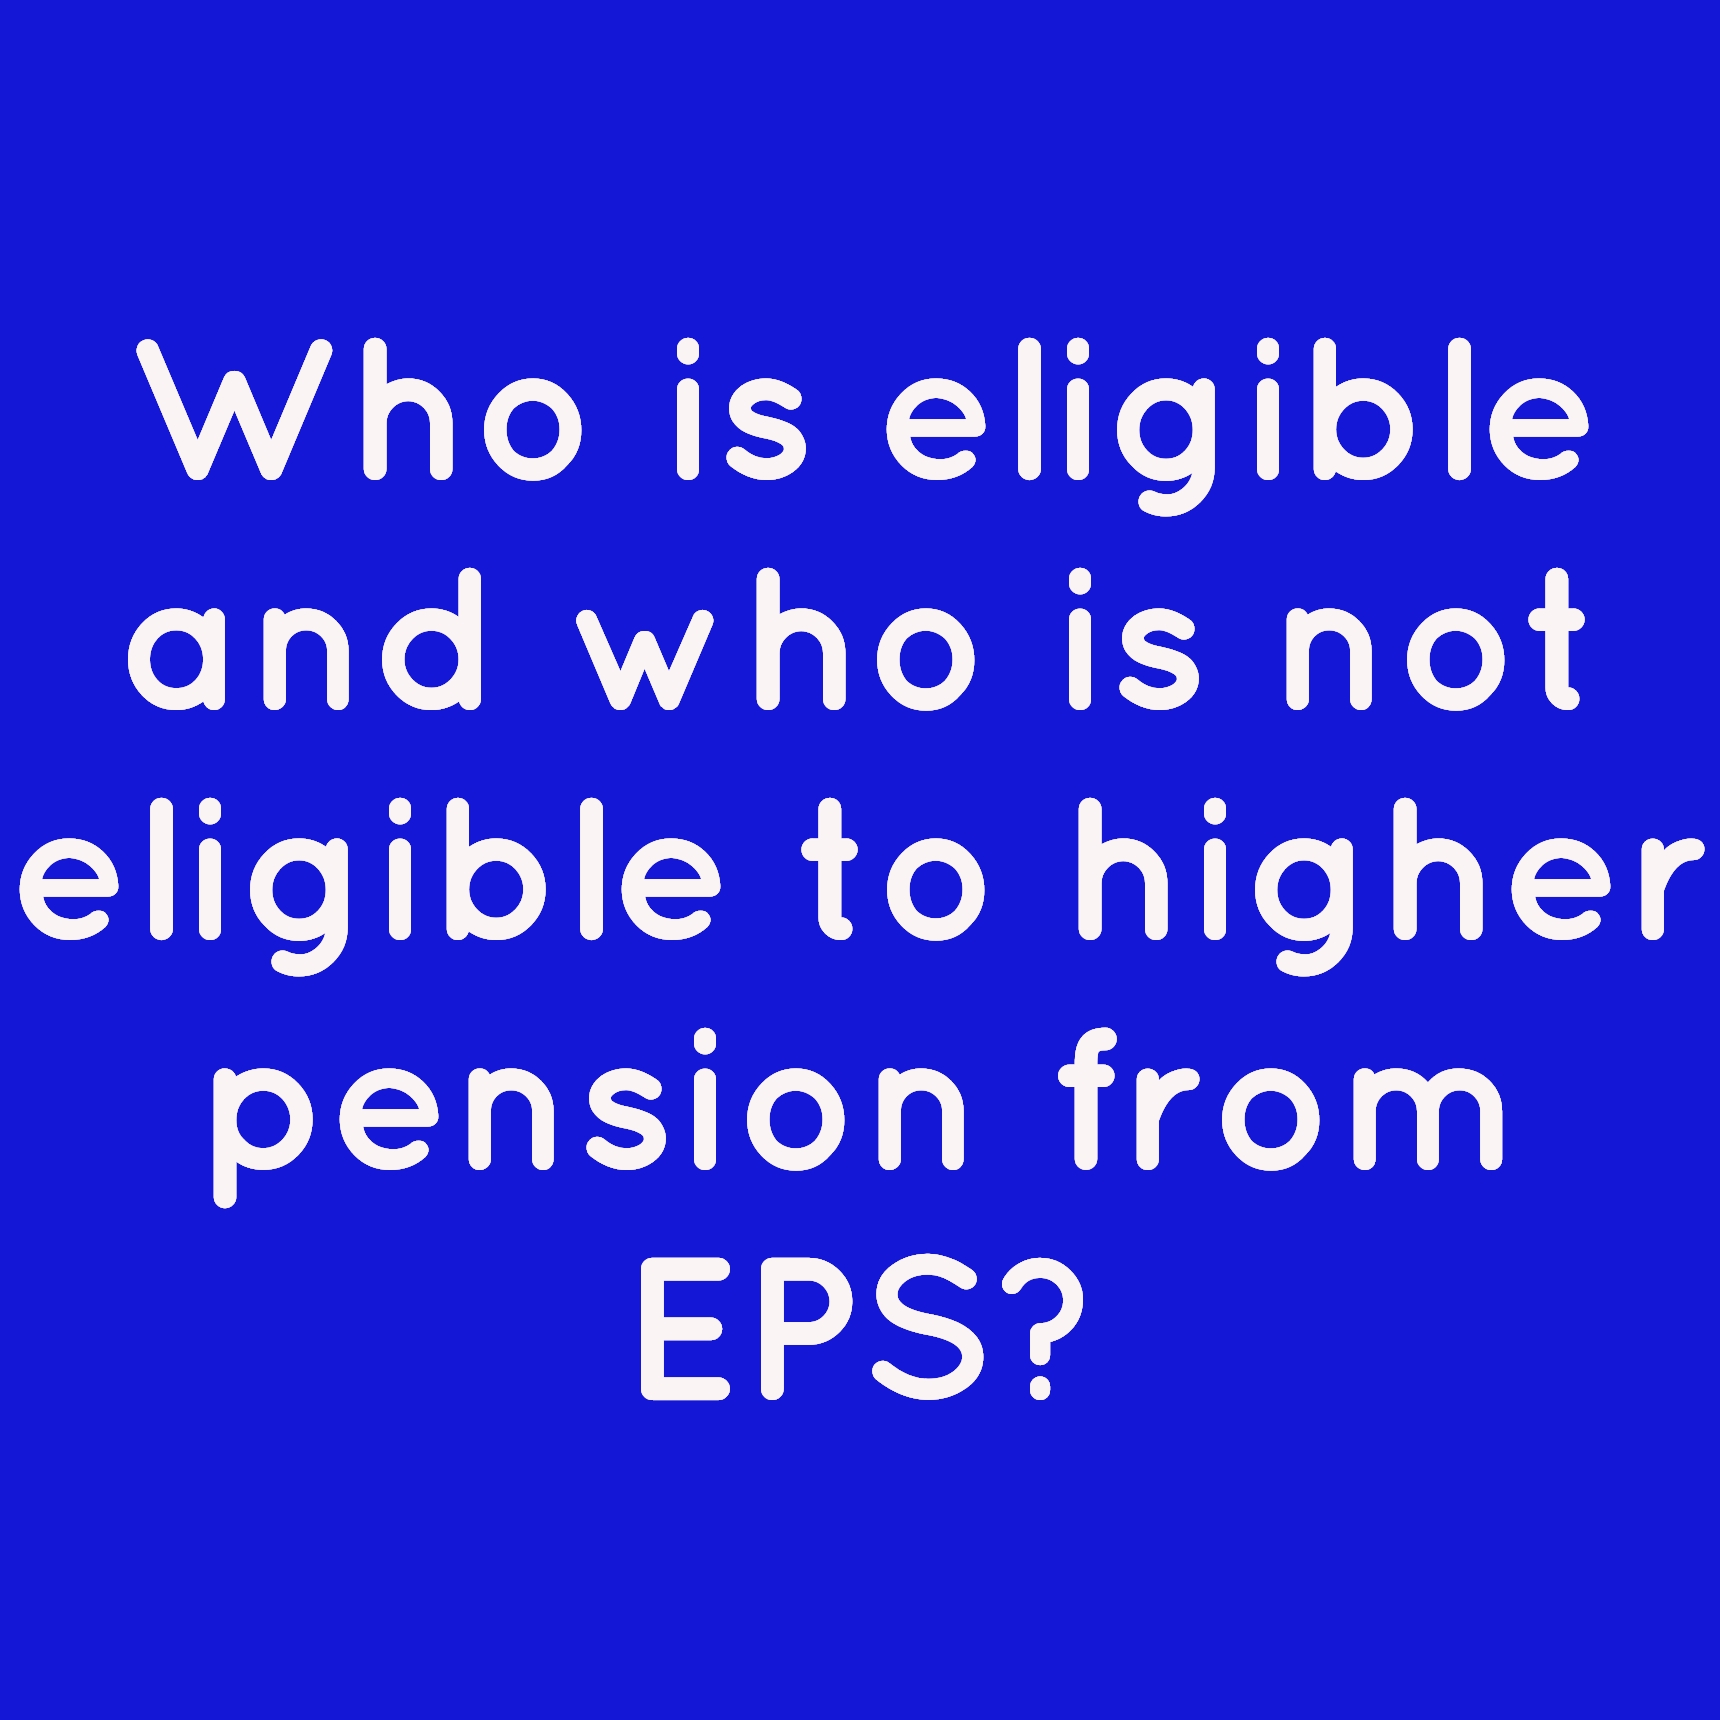 Who is eligible and who is not eligible to higher pension from EPS?